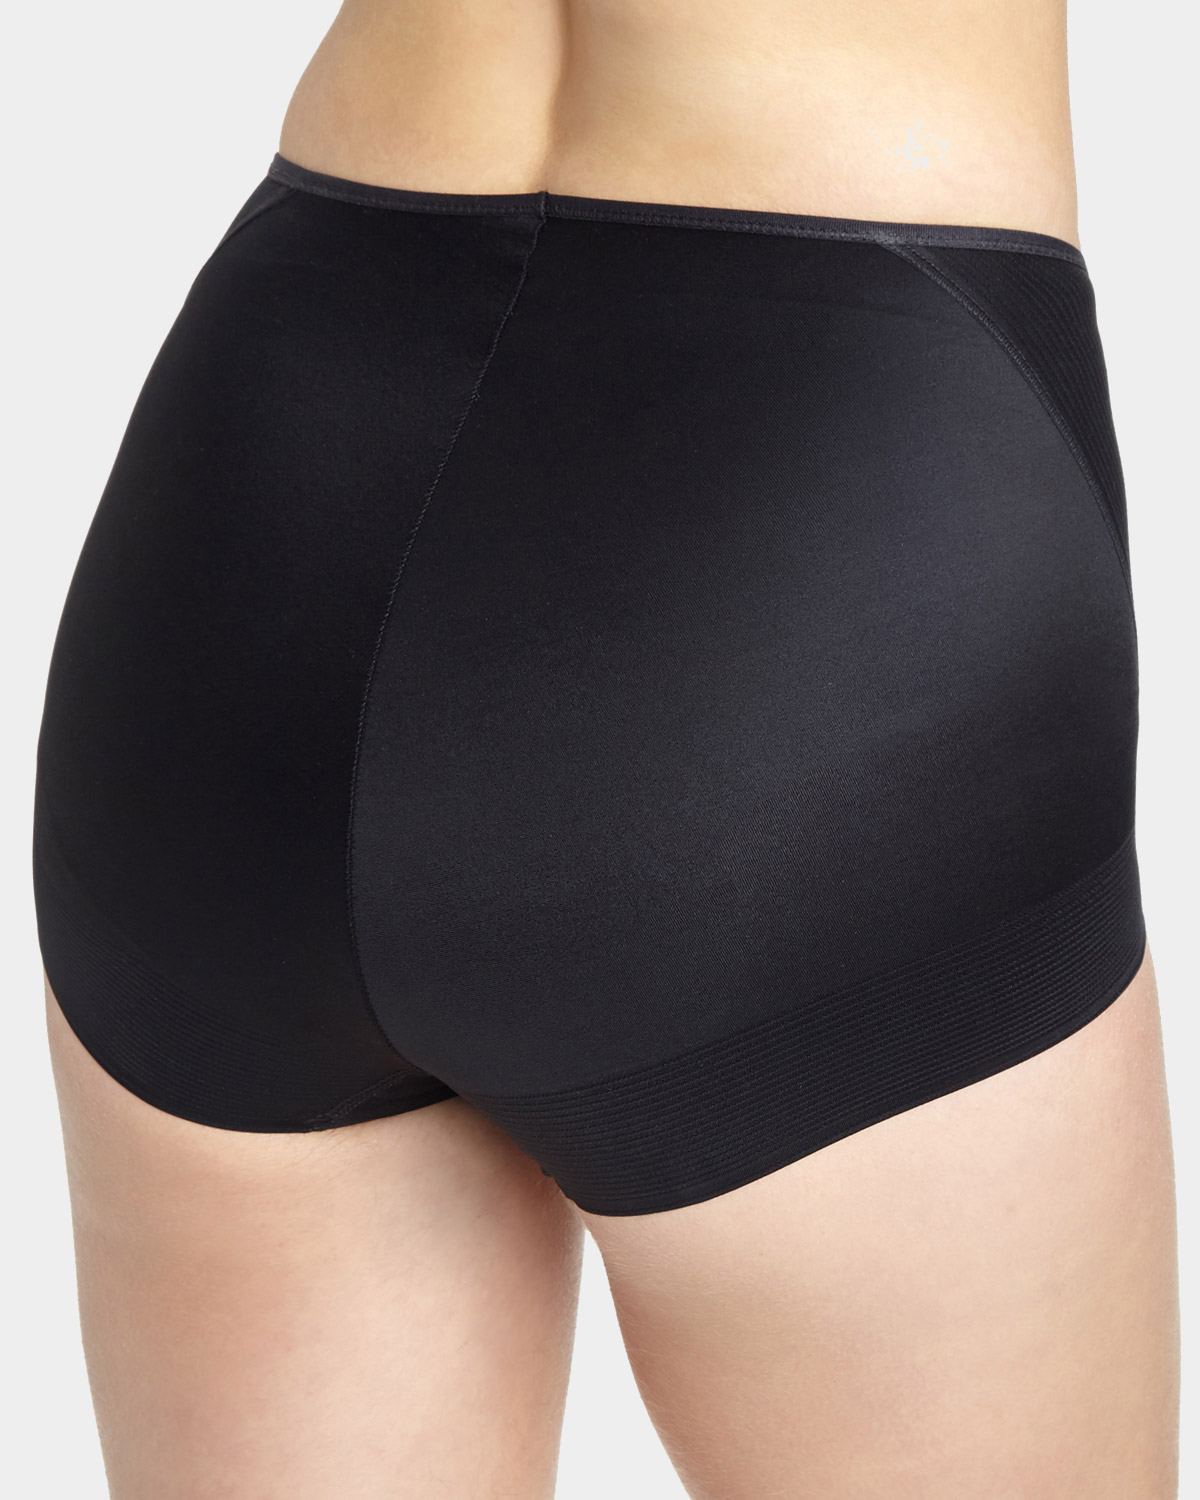 Buy Black Midi No VPL Scallop Edge Knickers from the Next UK online shop